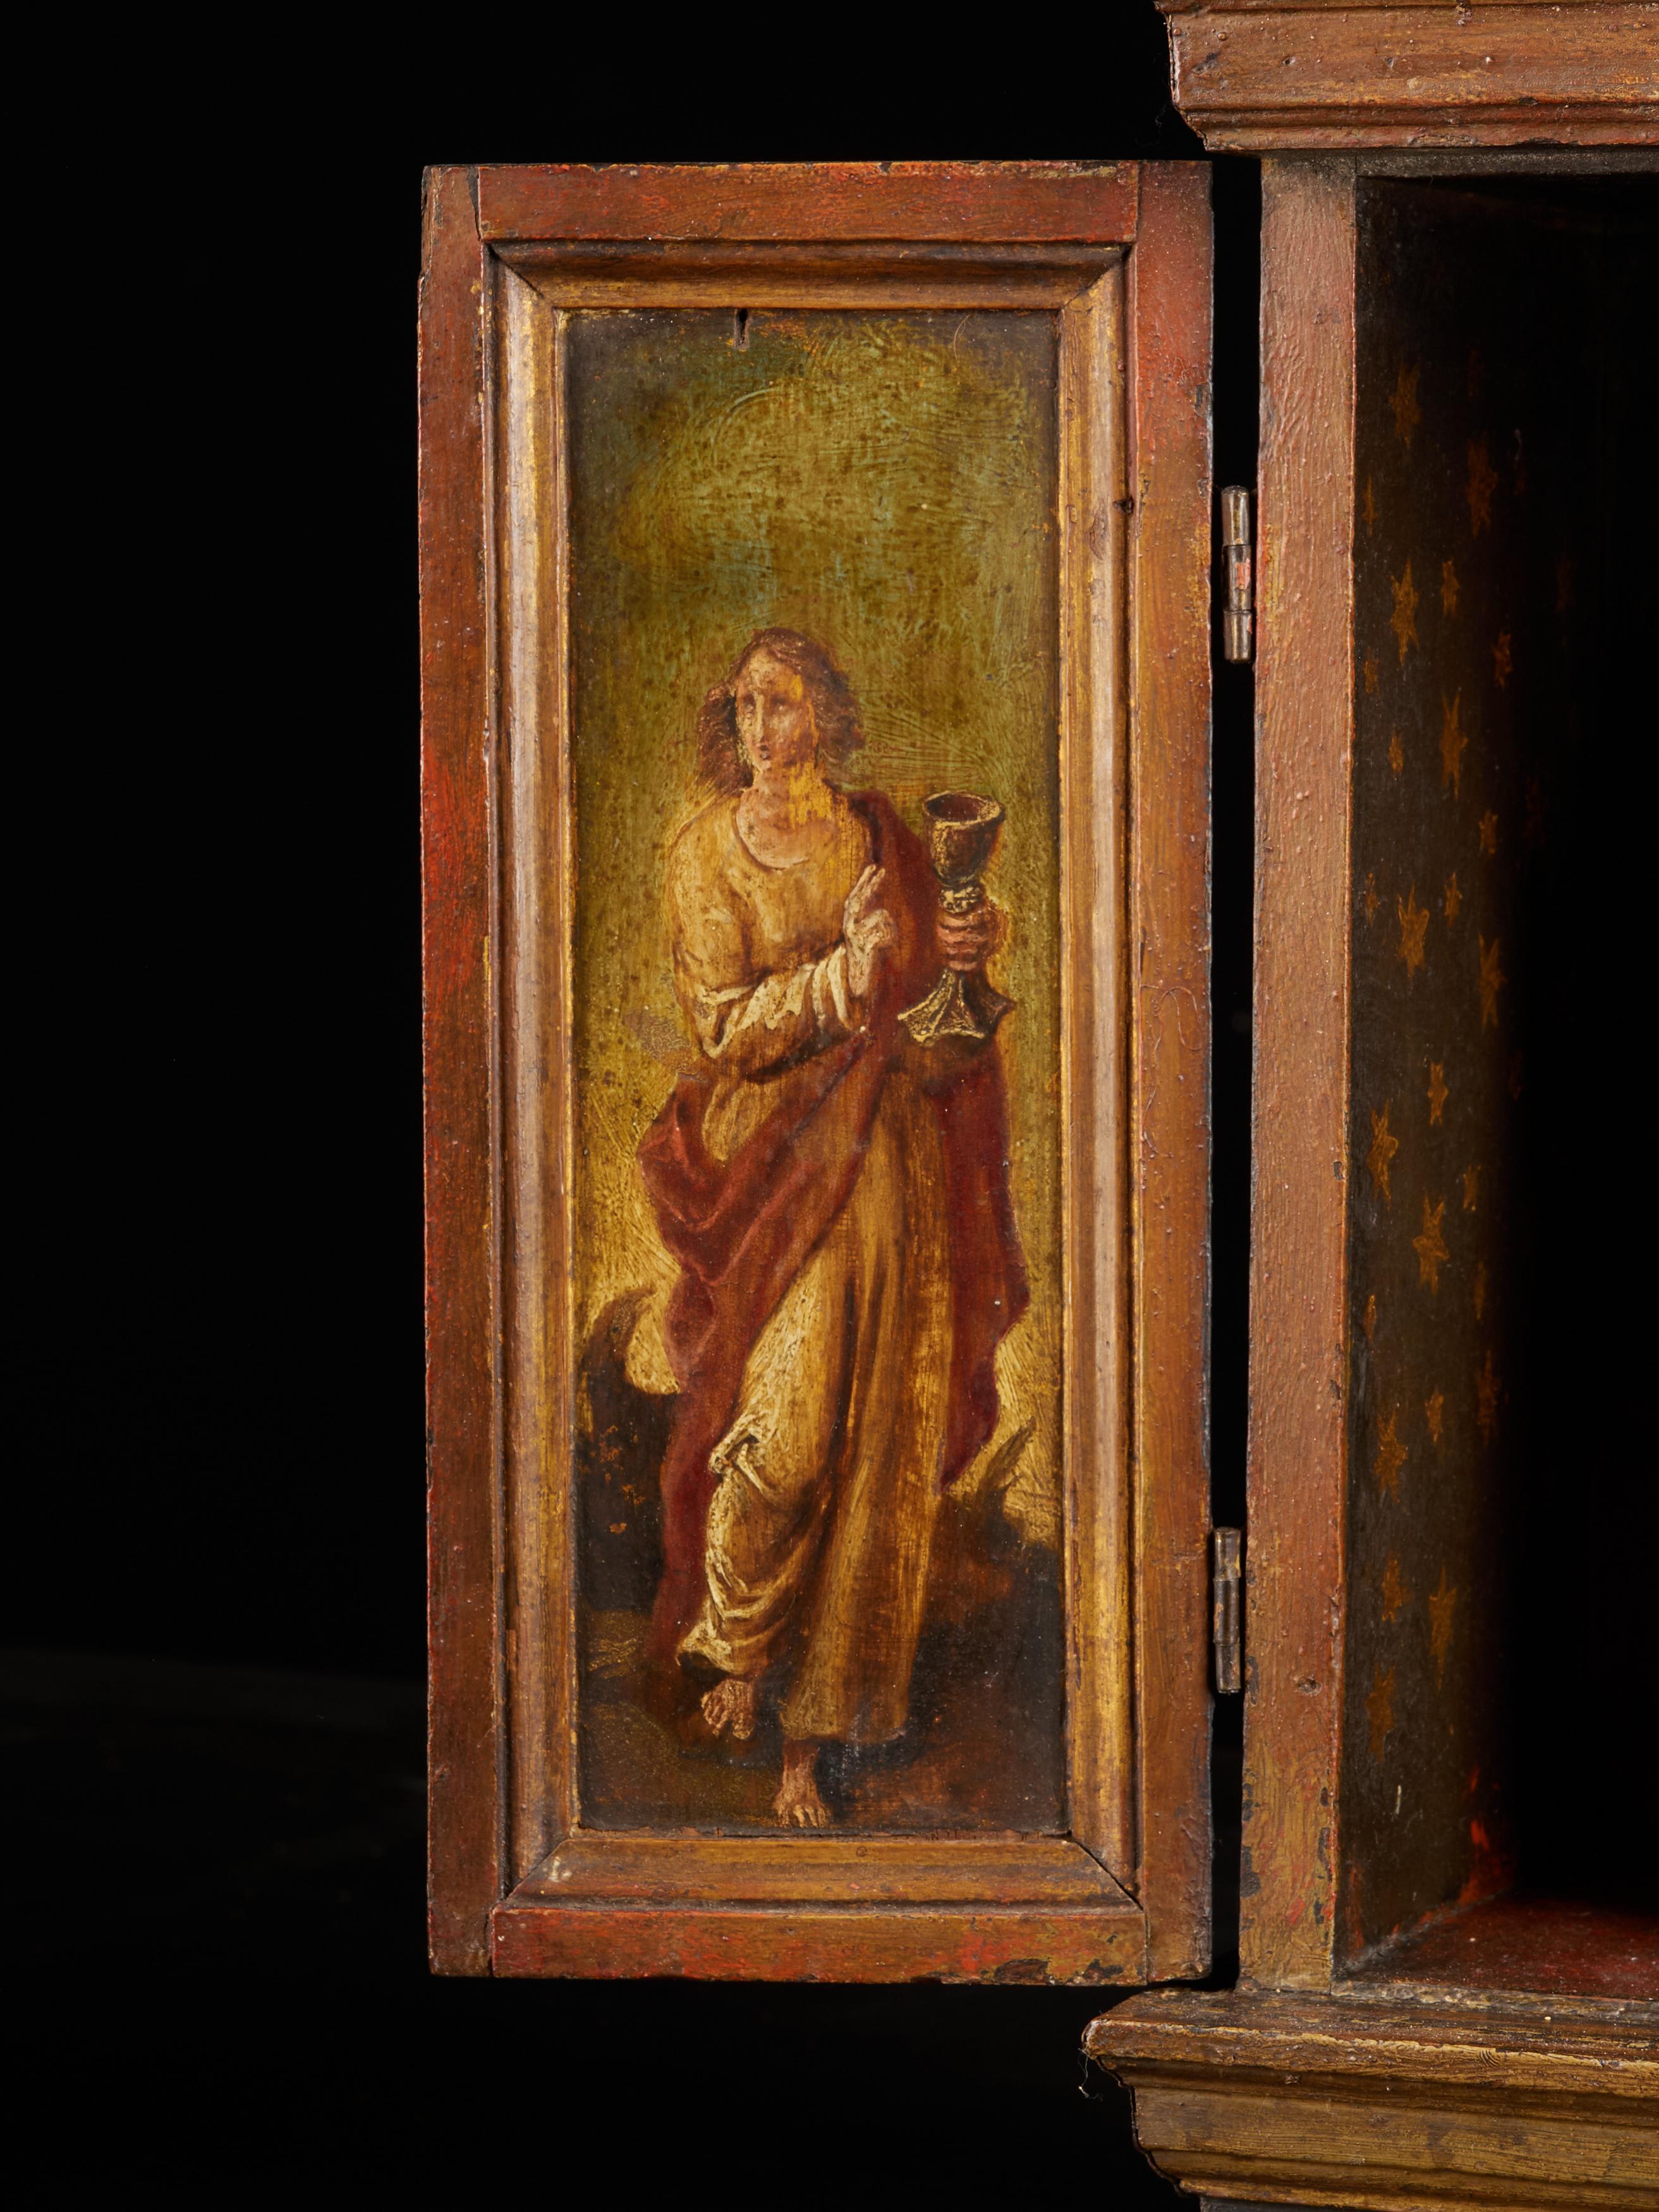 Flemish Small Terracotta Statue in Wooden Reliquary with Decorated Doors 1